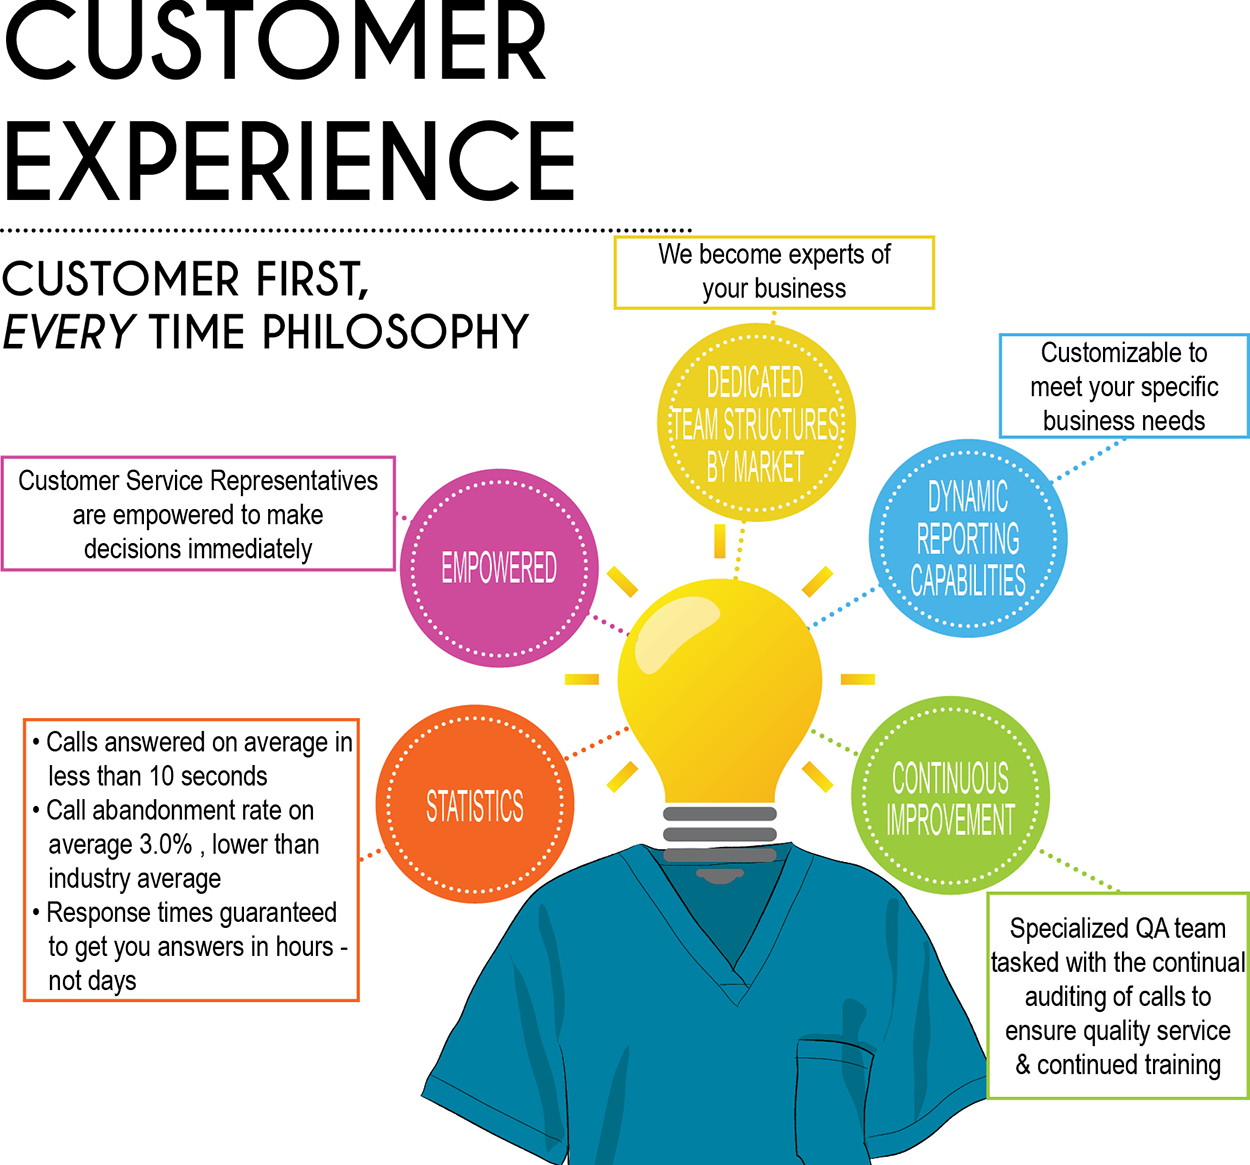 Customer Experience from Fashion Seal Healthcare